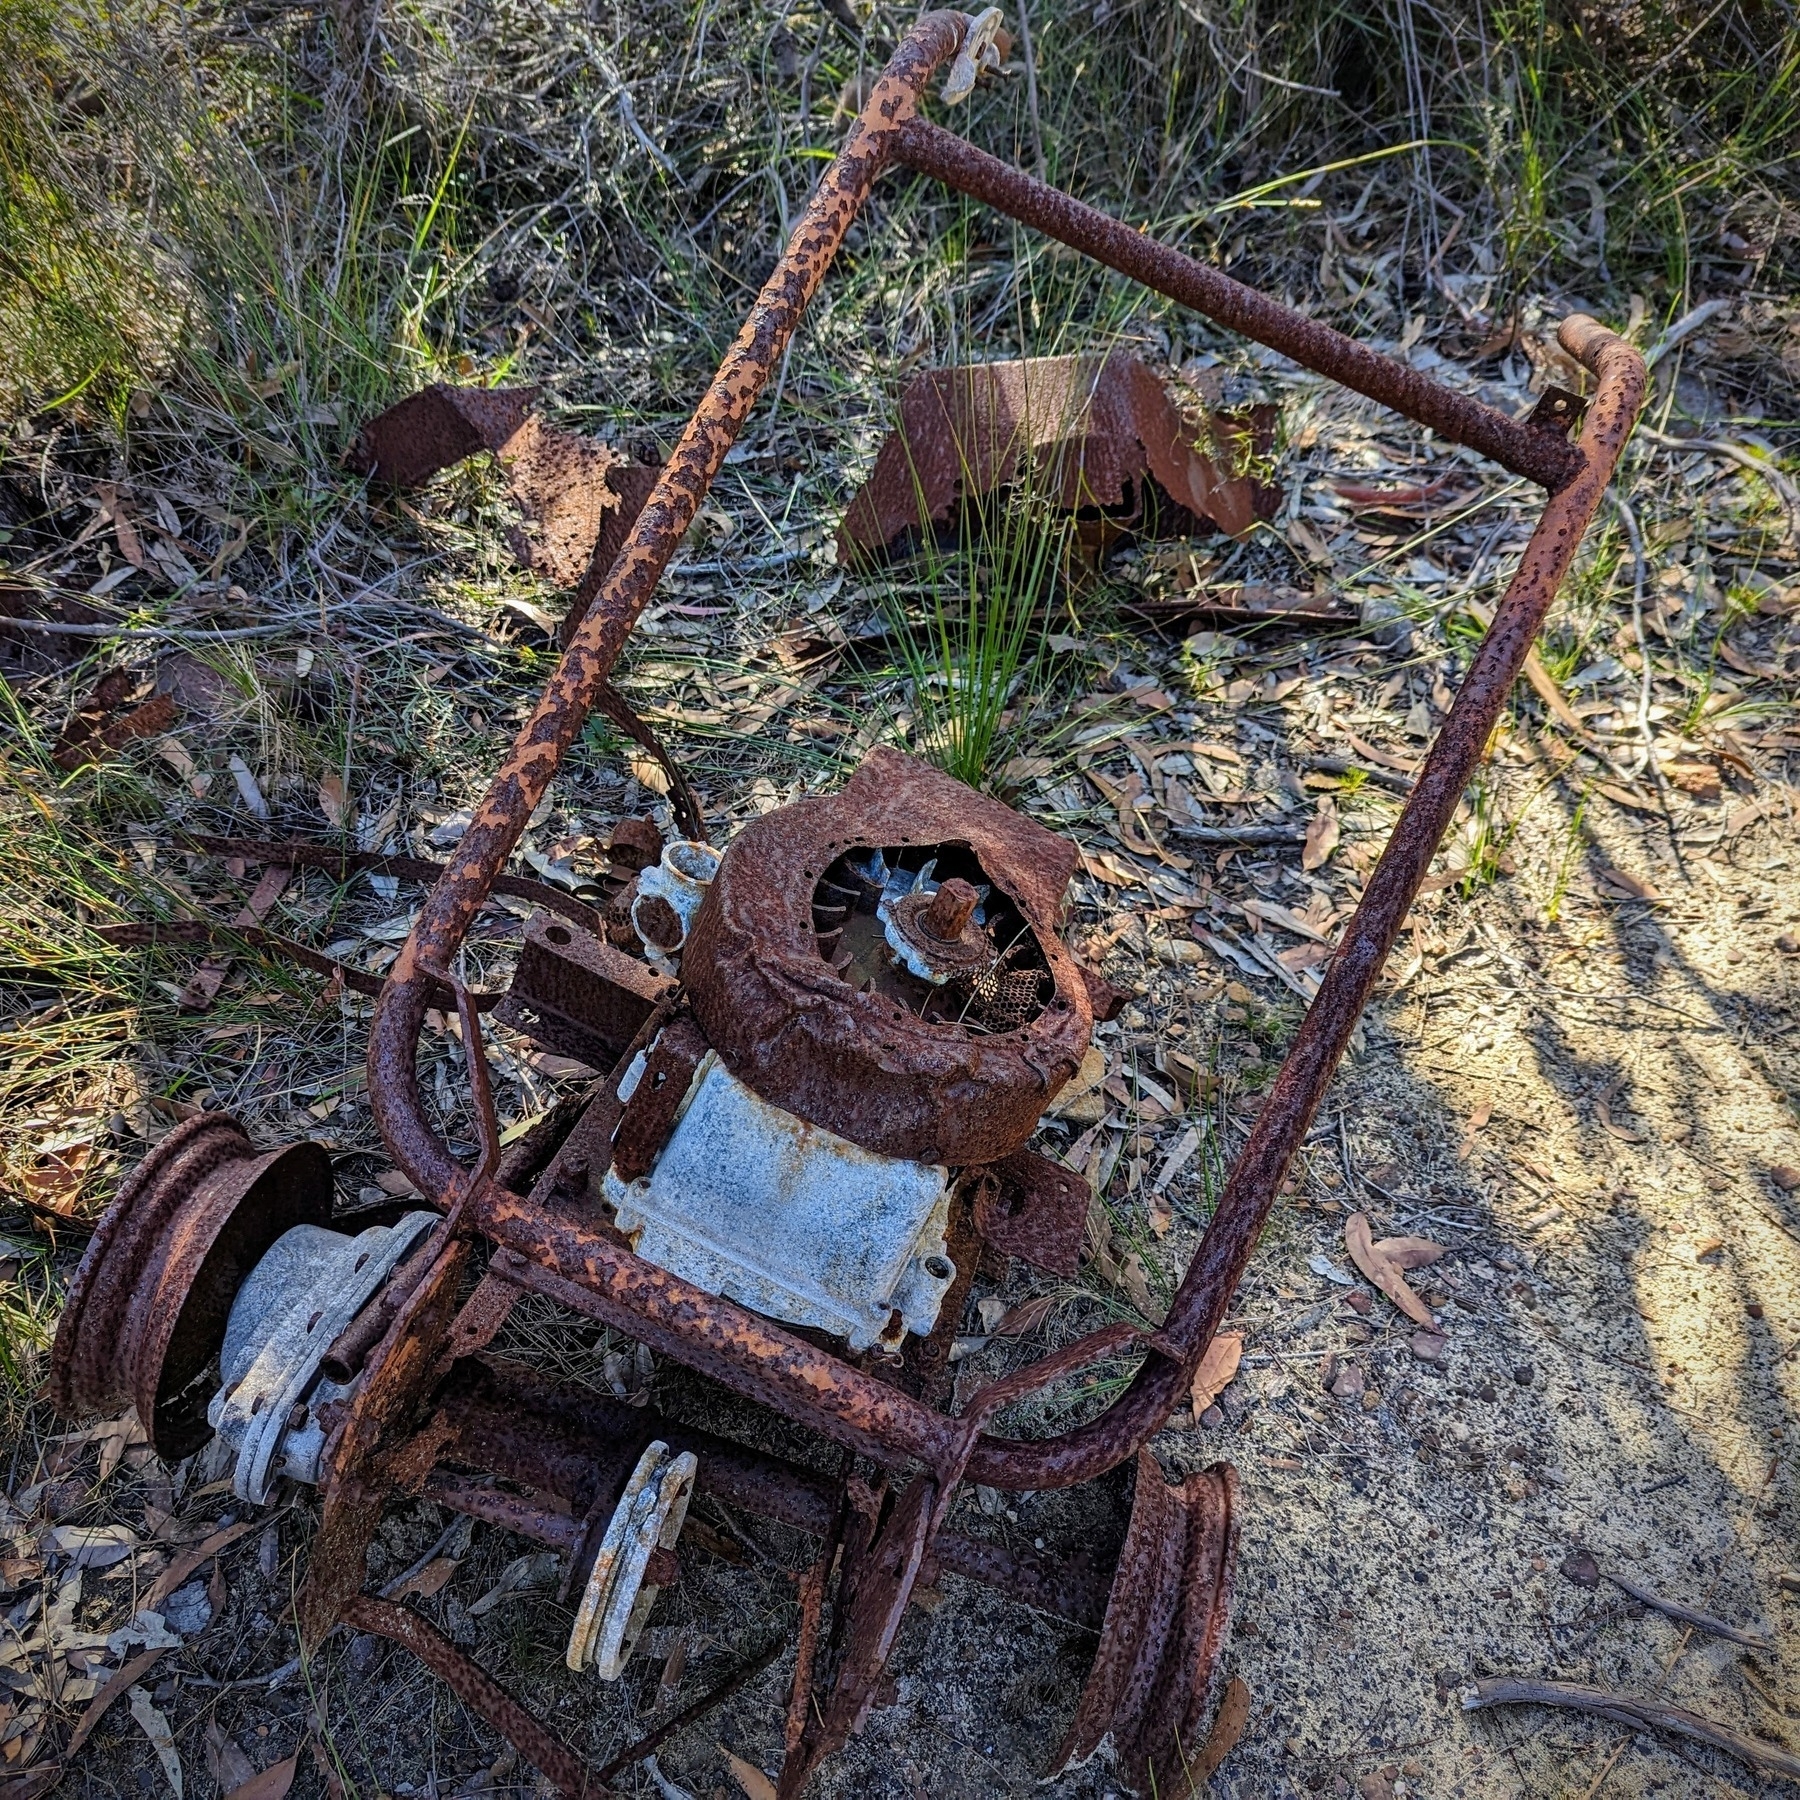 Abandoned machinery, maybe an old lawnmower, rusting in the bush